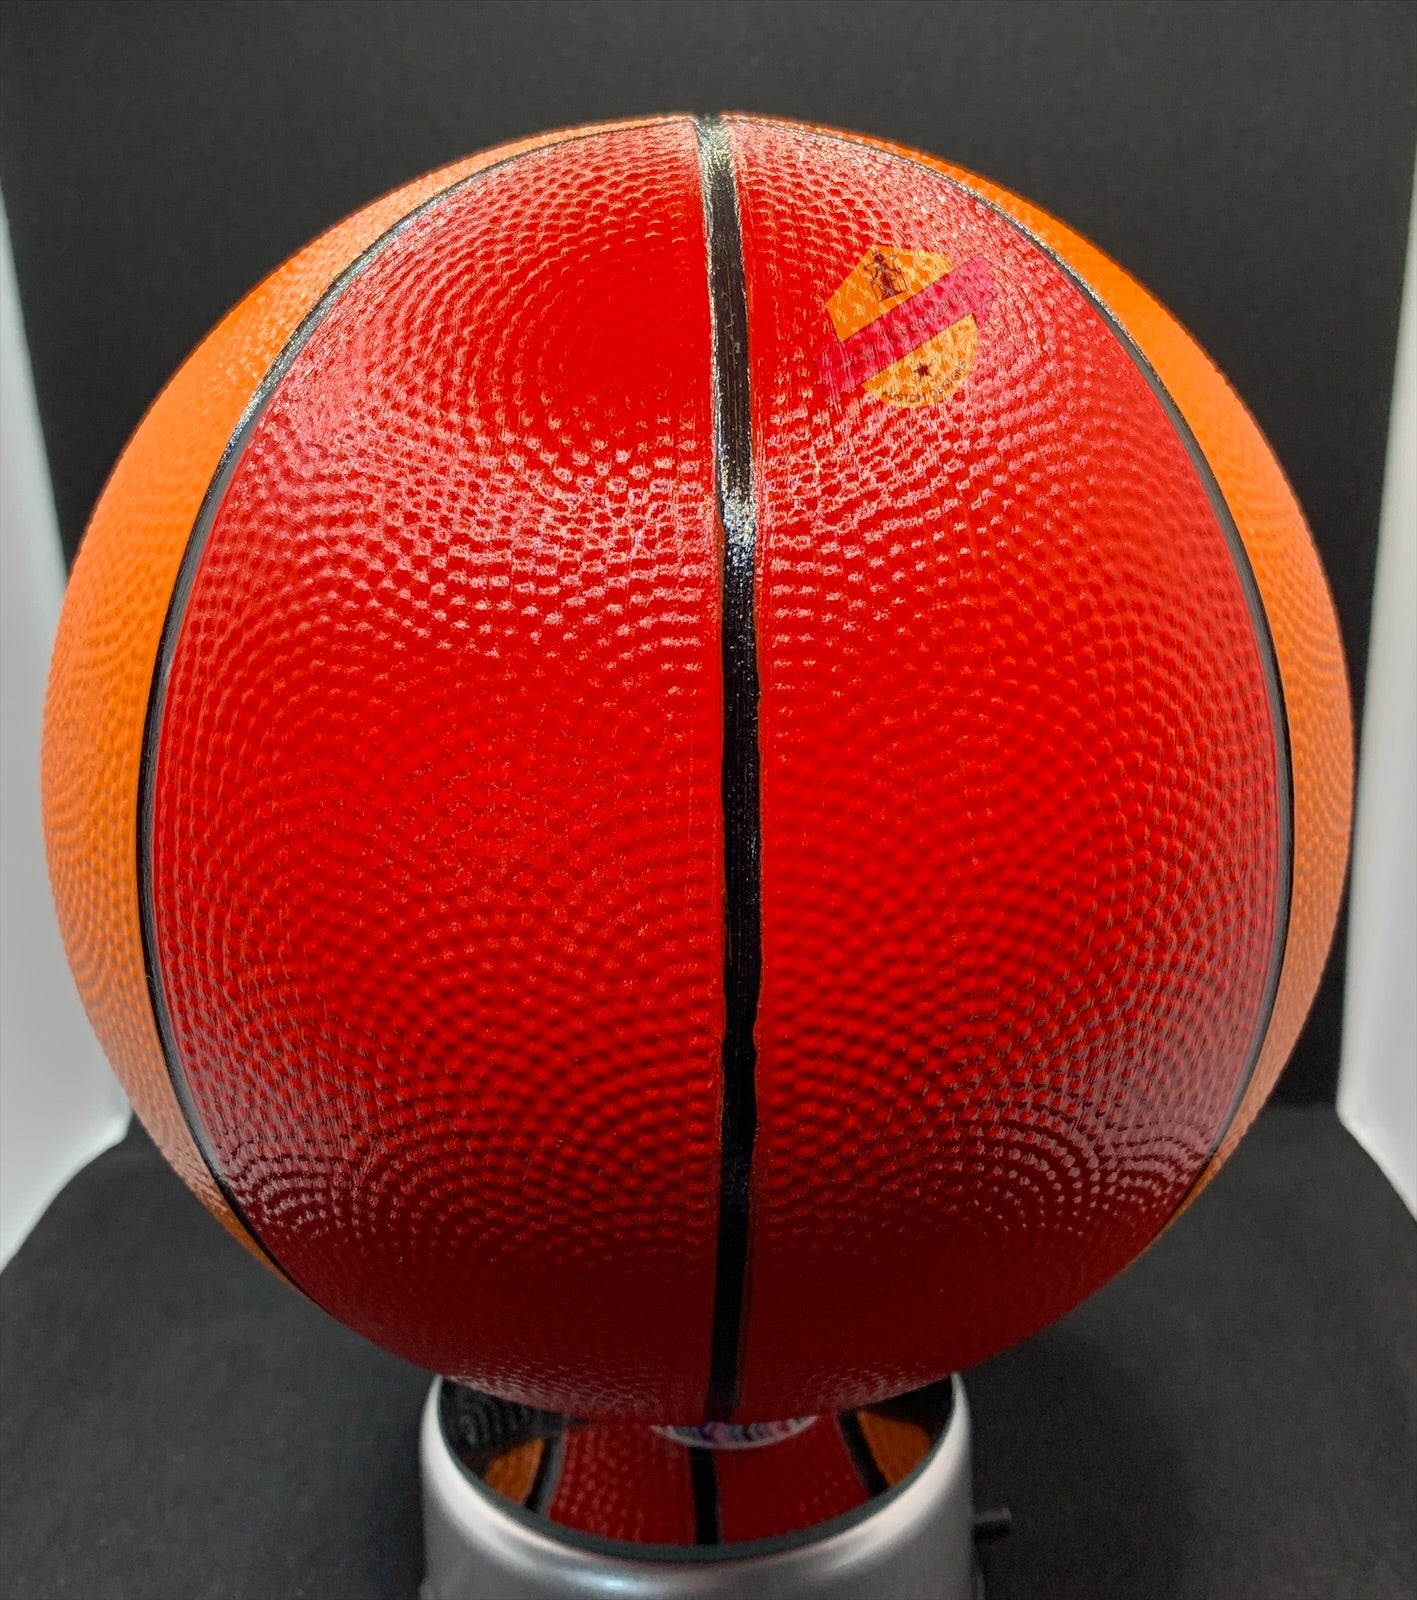 Customized Basketball (For Display Purposes Only)